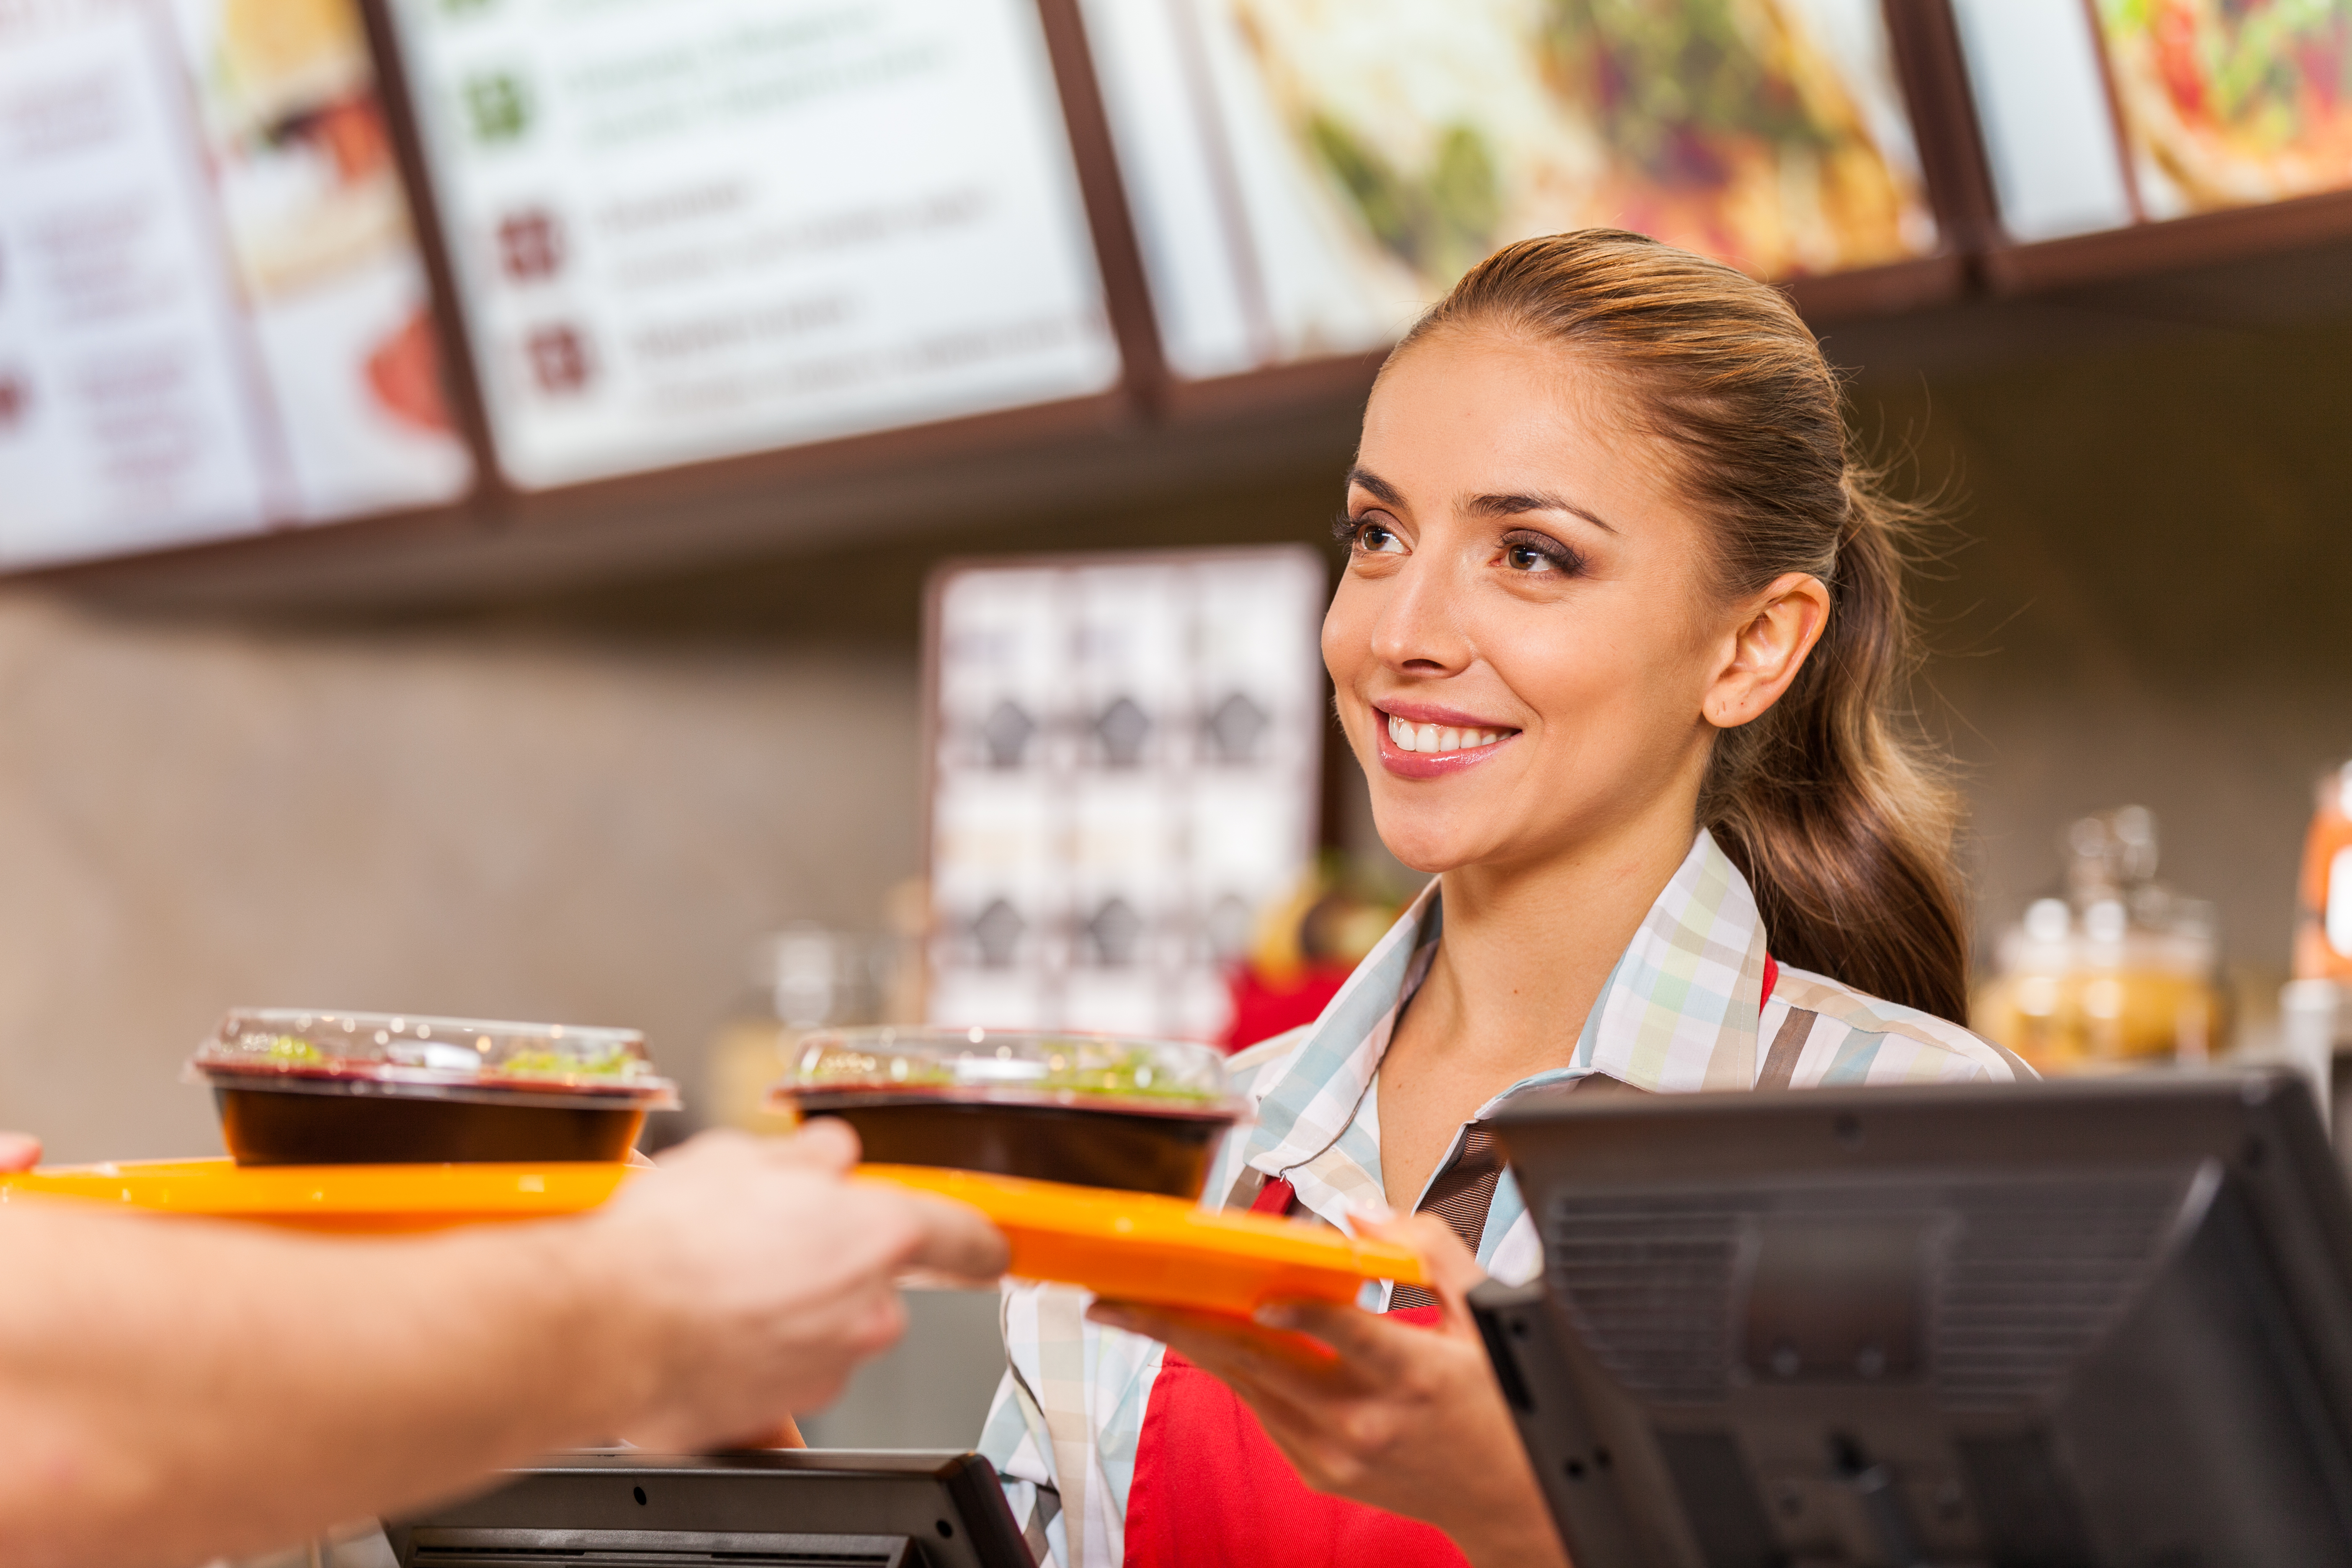 Restaurant Worker Serving Two Fast Food Meals With Smile